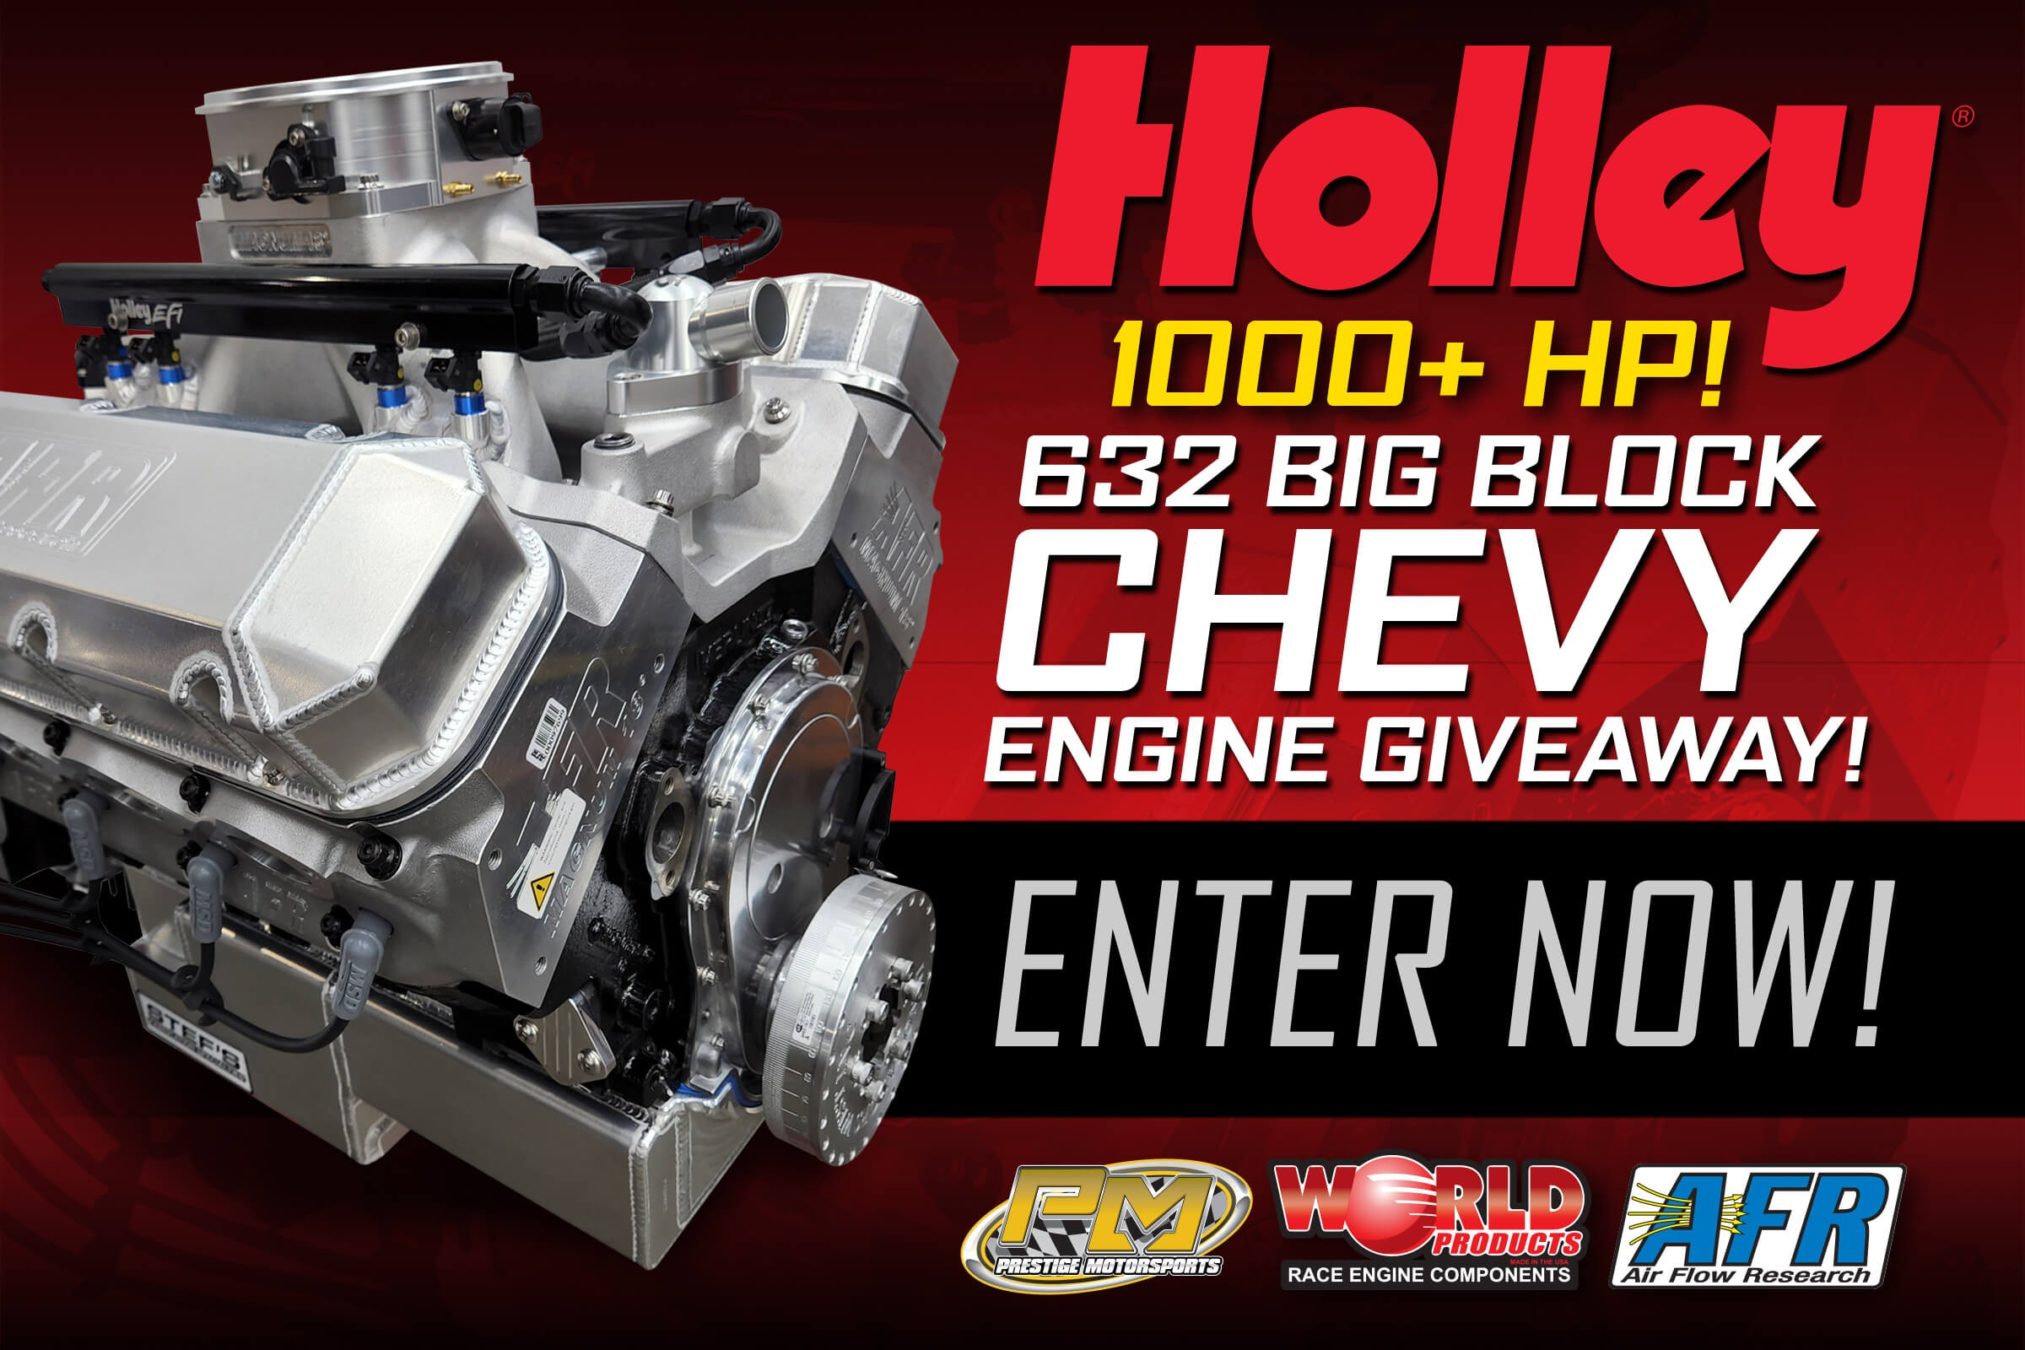 Holley 1000+ 632 Big Block Chevy Engine Giveaway